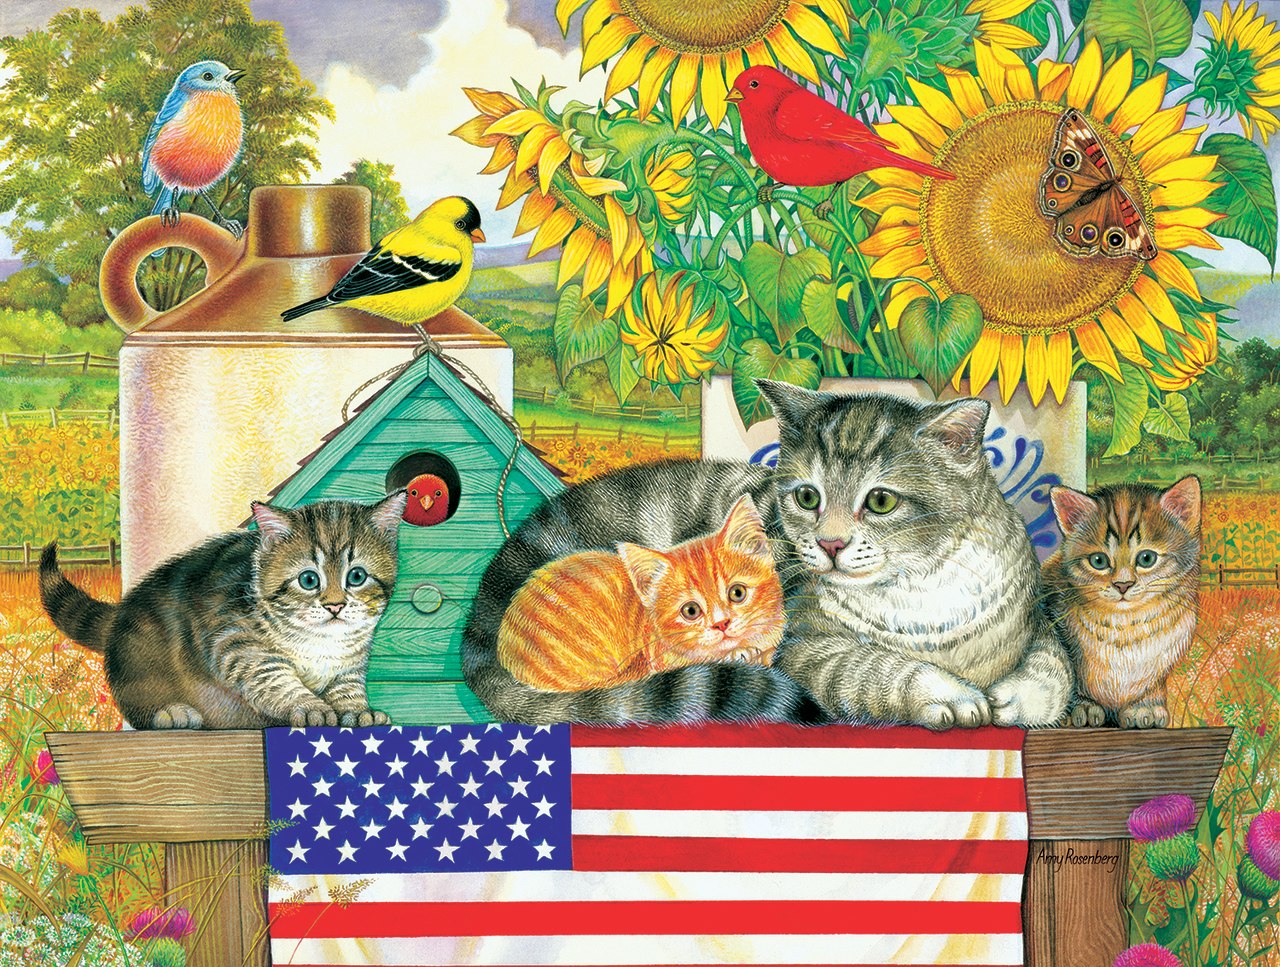 Patriotic Kittens - 300pc Jigsaw Puzzle by Sunsout  			  					NEW